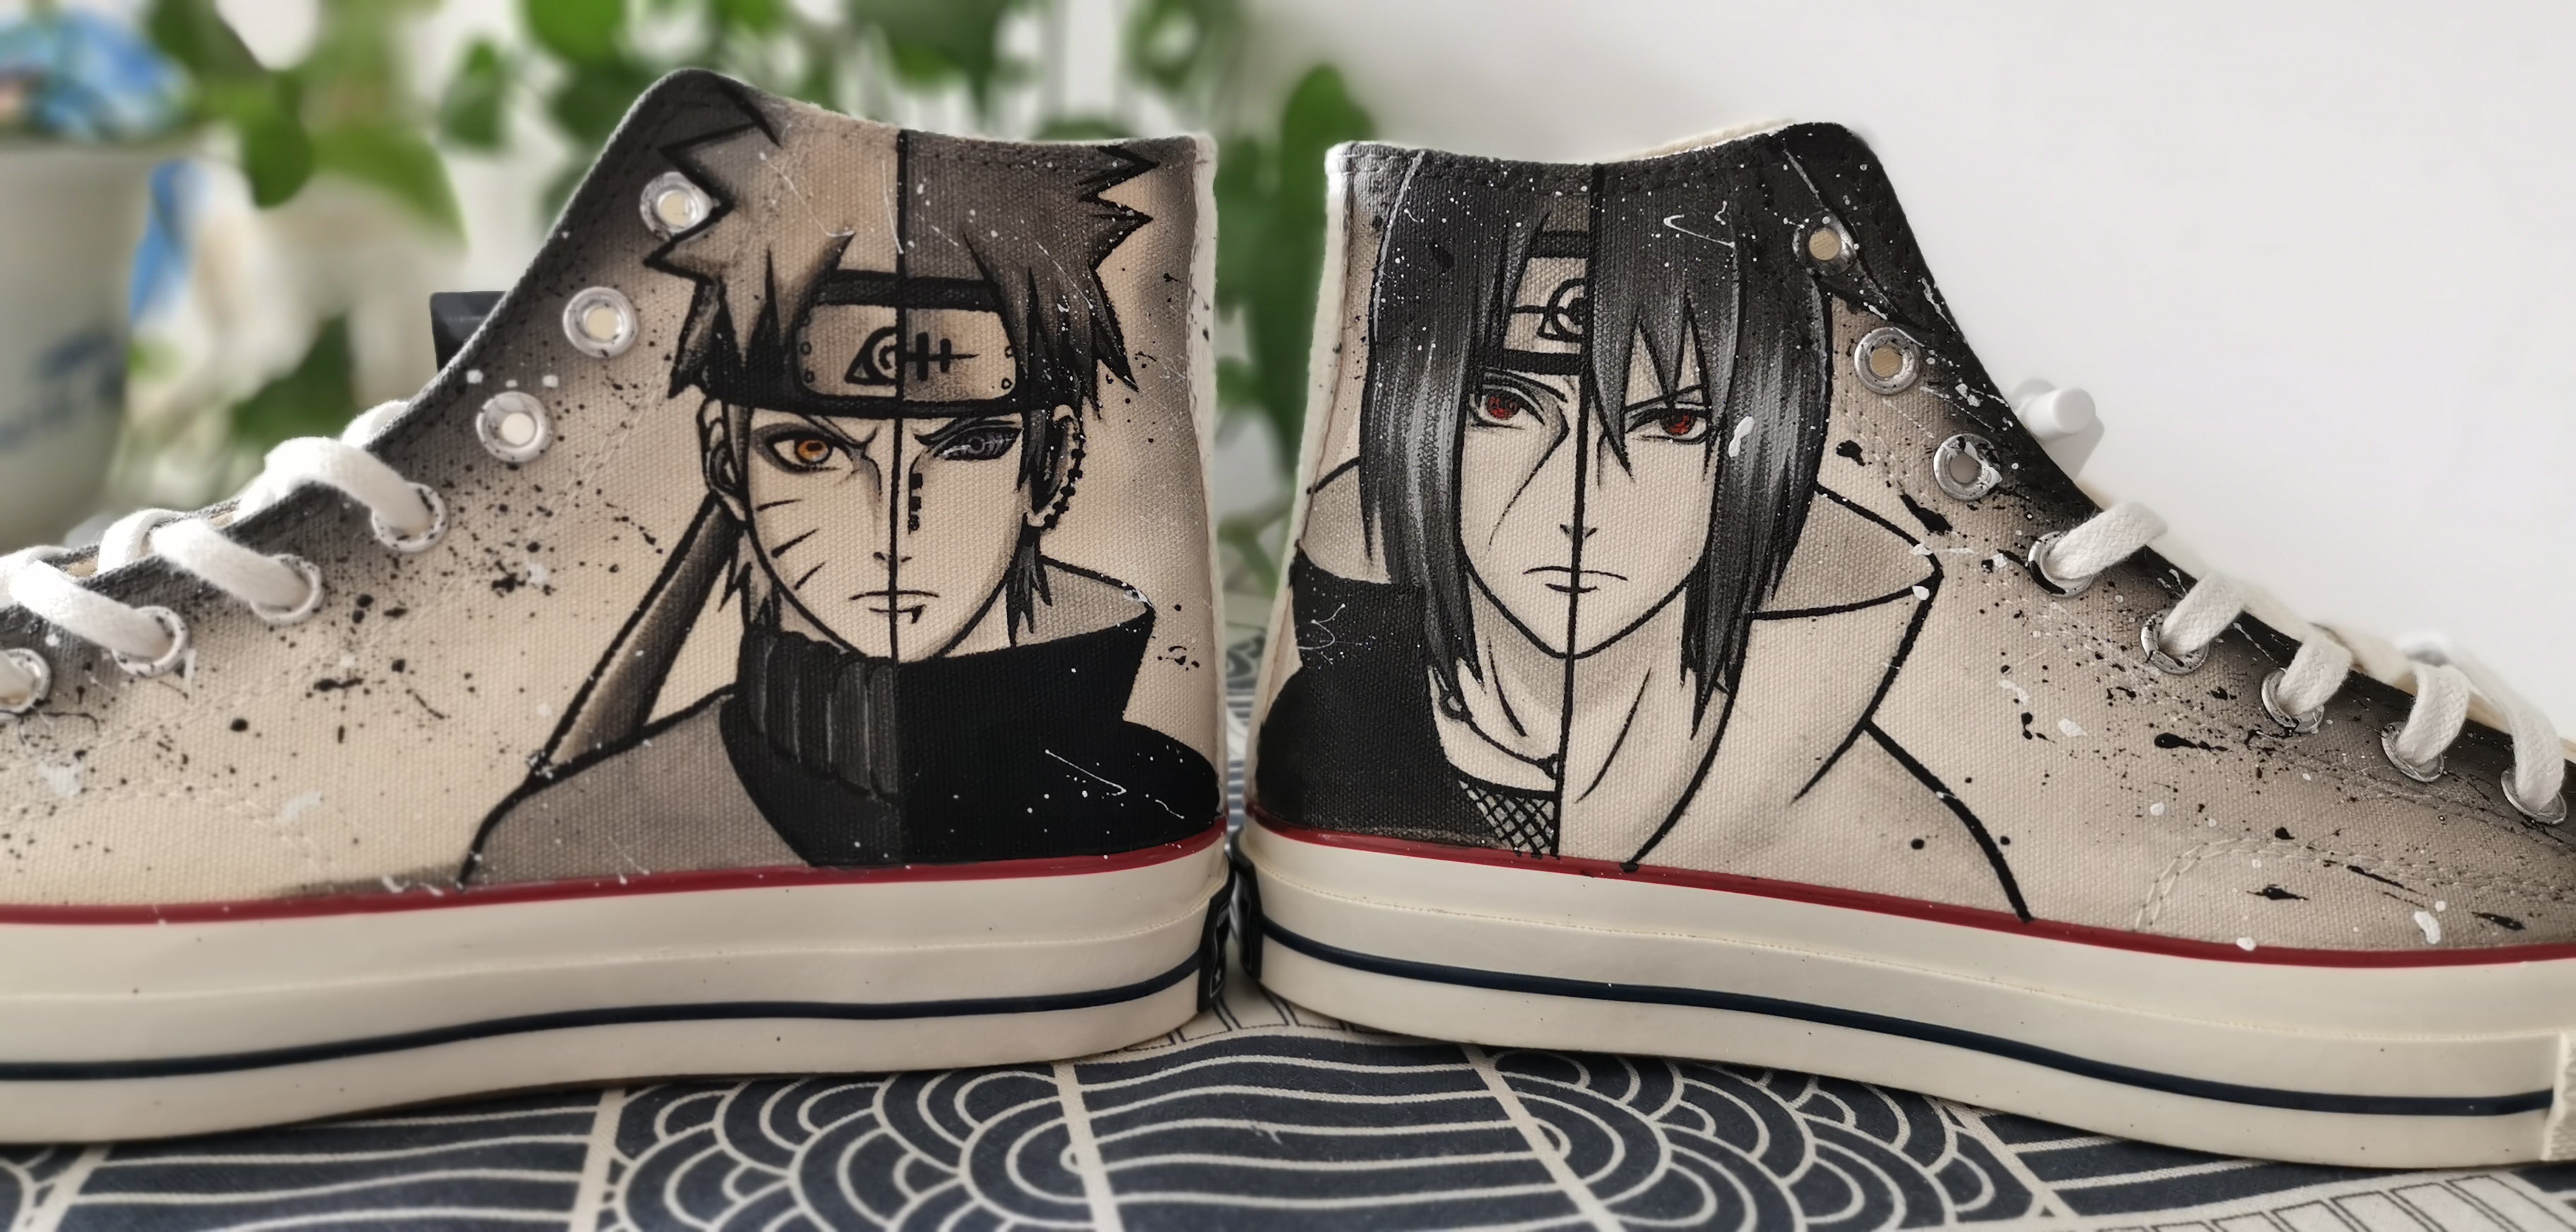 Naruto hand-painted shoes yv42664 – Youvimi